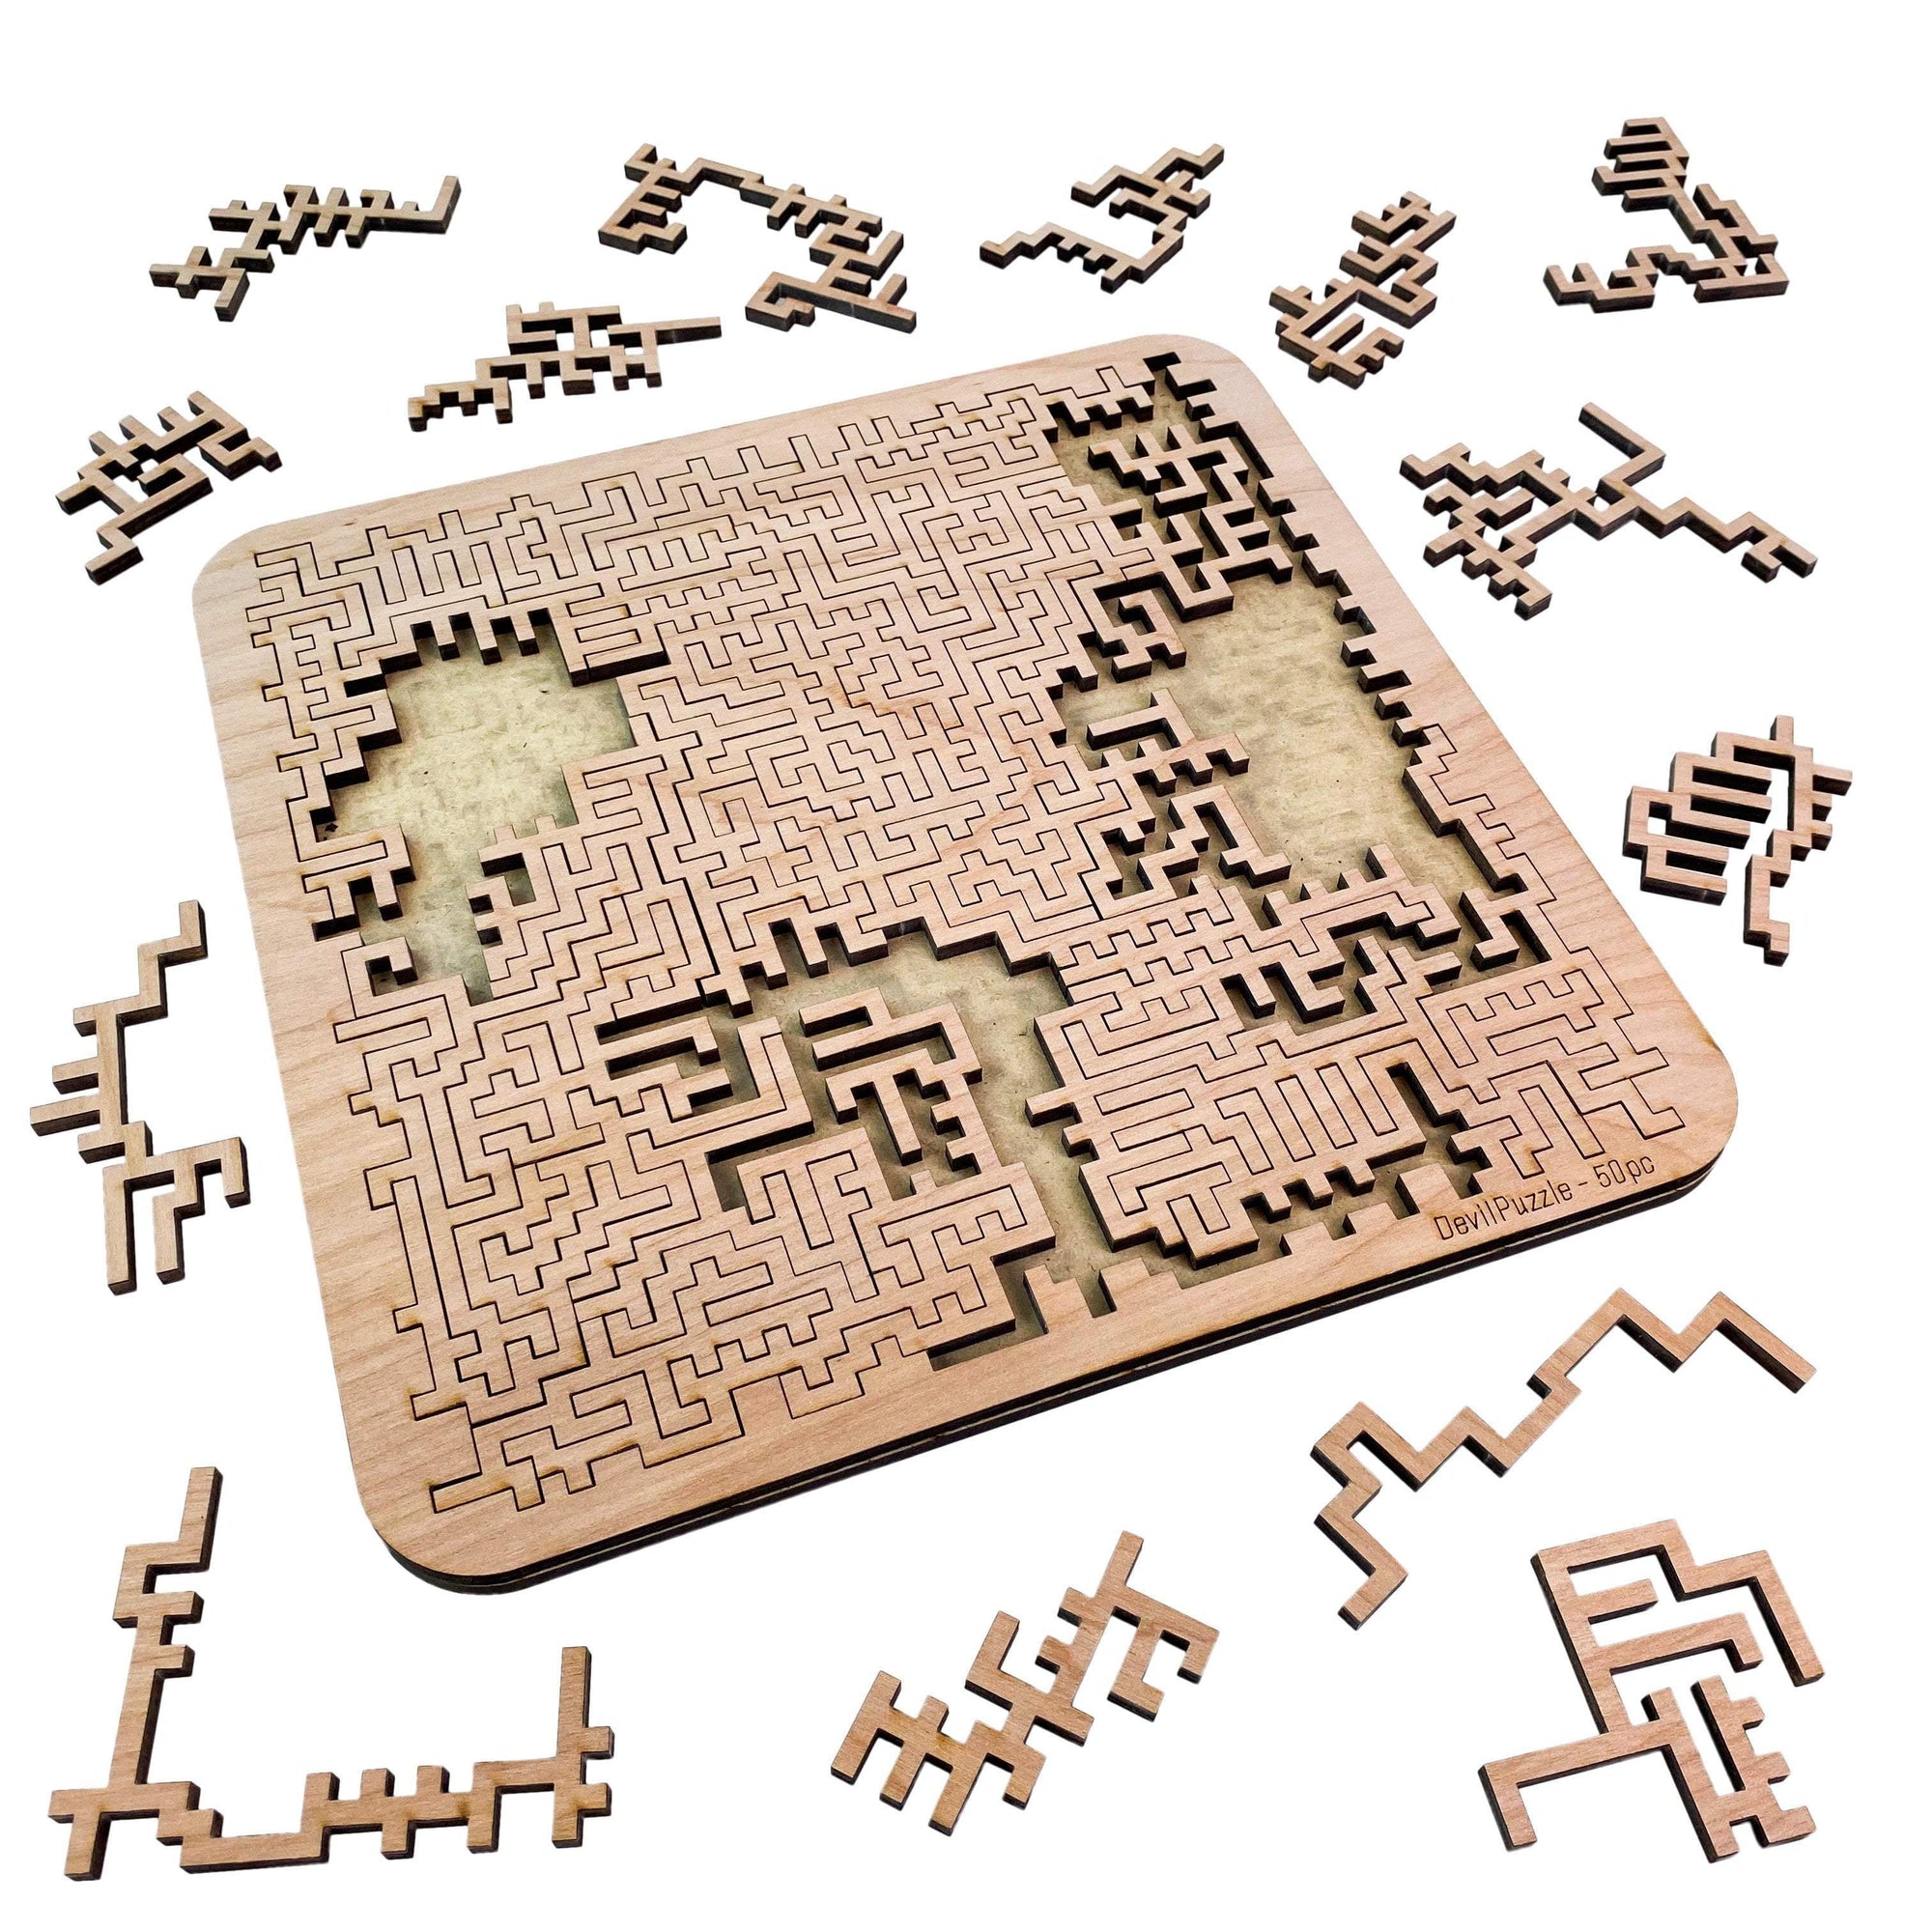 Torched Products MIND BENDING AZTEC LABYRINTH PUZZLE